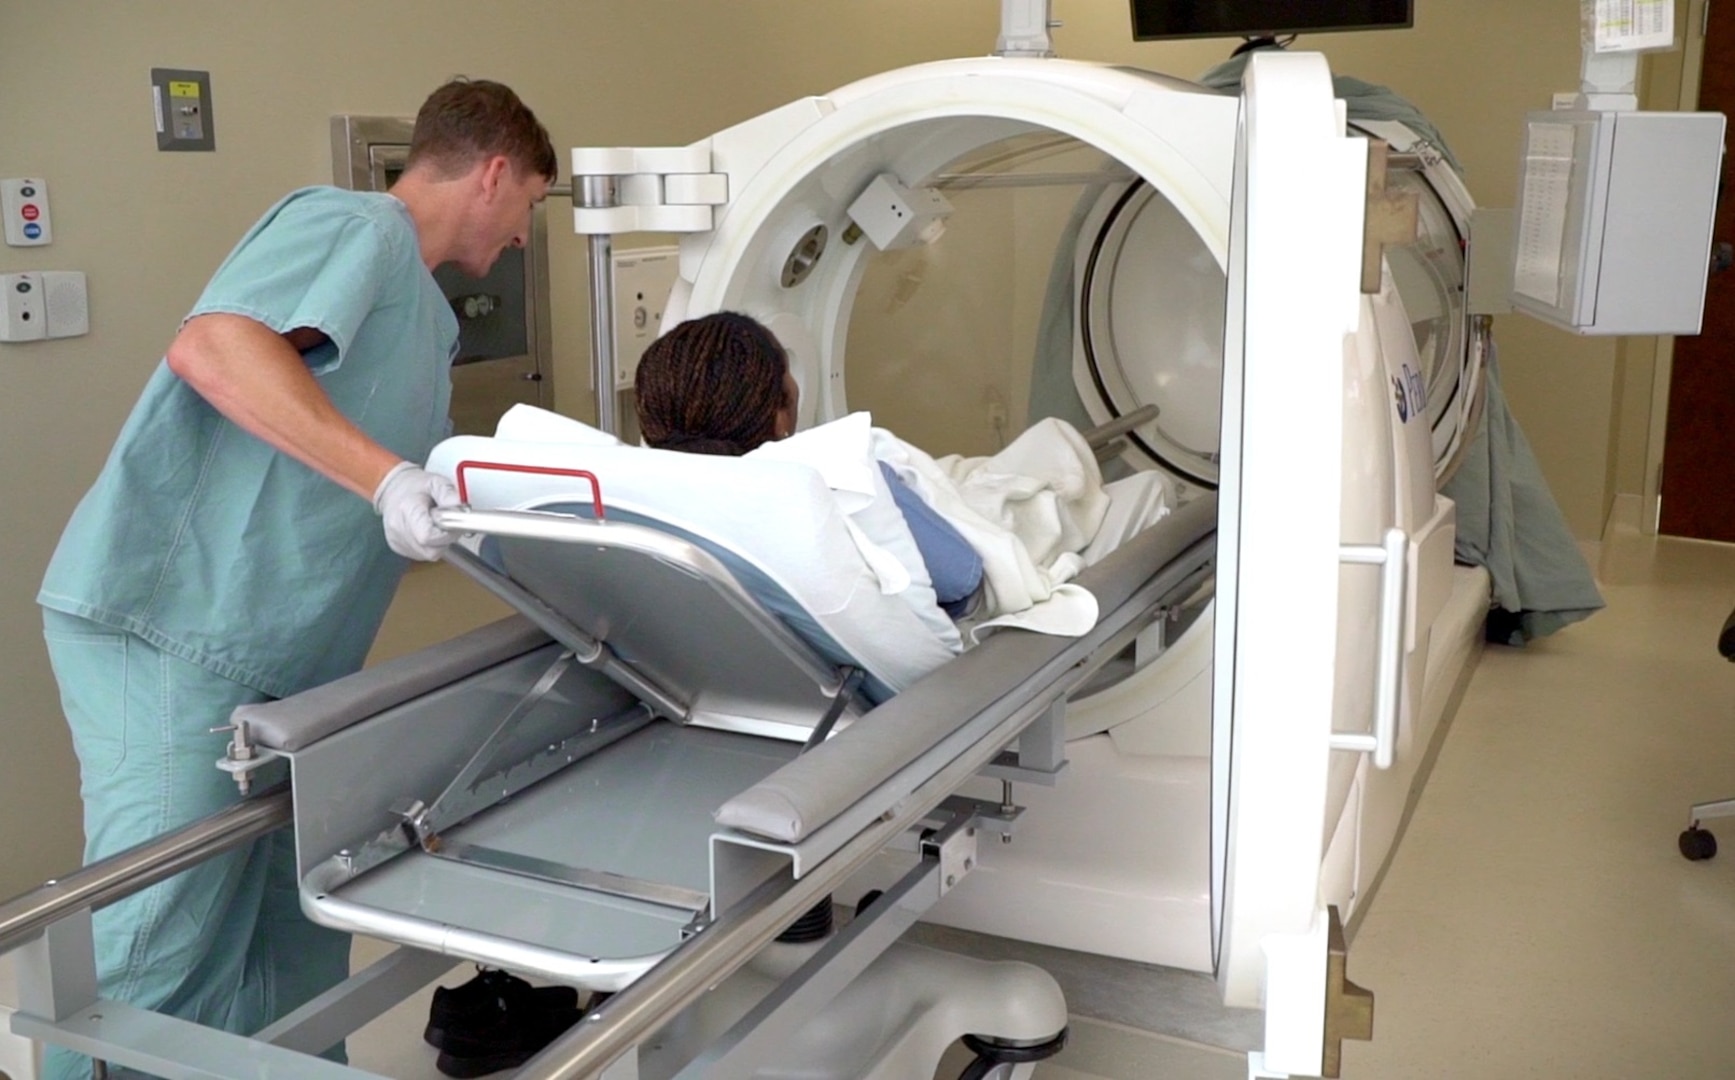 A staff member places a patient into the single hyperbaric oxygen chamber at the Undersea & Hyperbaric Medicine Clinic at Brooke Army Medical Center. Hyperbaric oxygen is an intervention in which an individual breathes nearly 100 percent oxygen while inside a hyperbaric chamber that is pressurized to greater than sea level pressure.